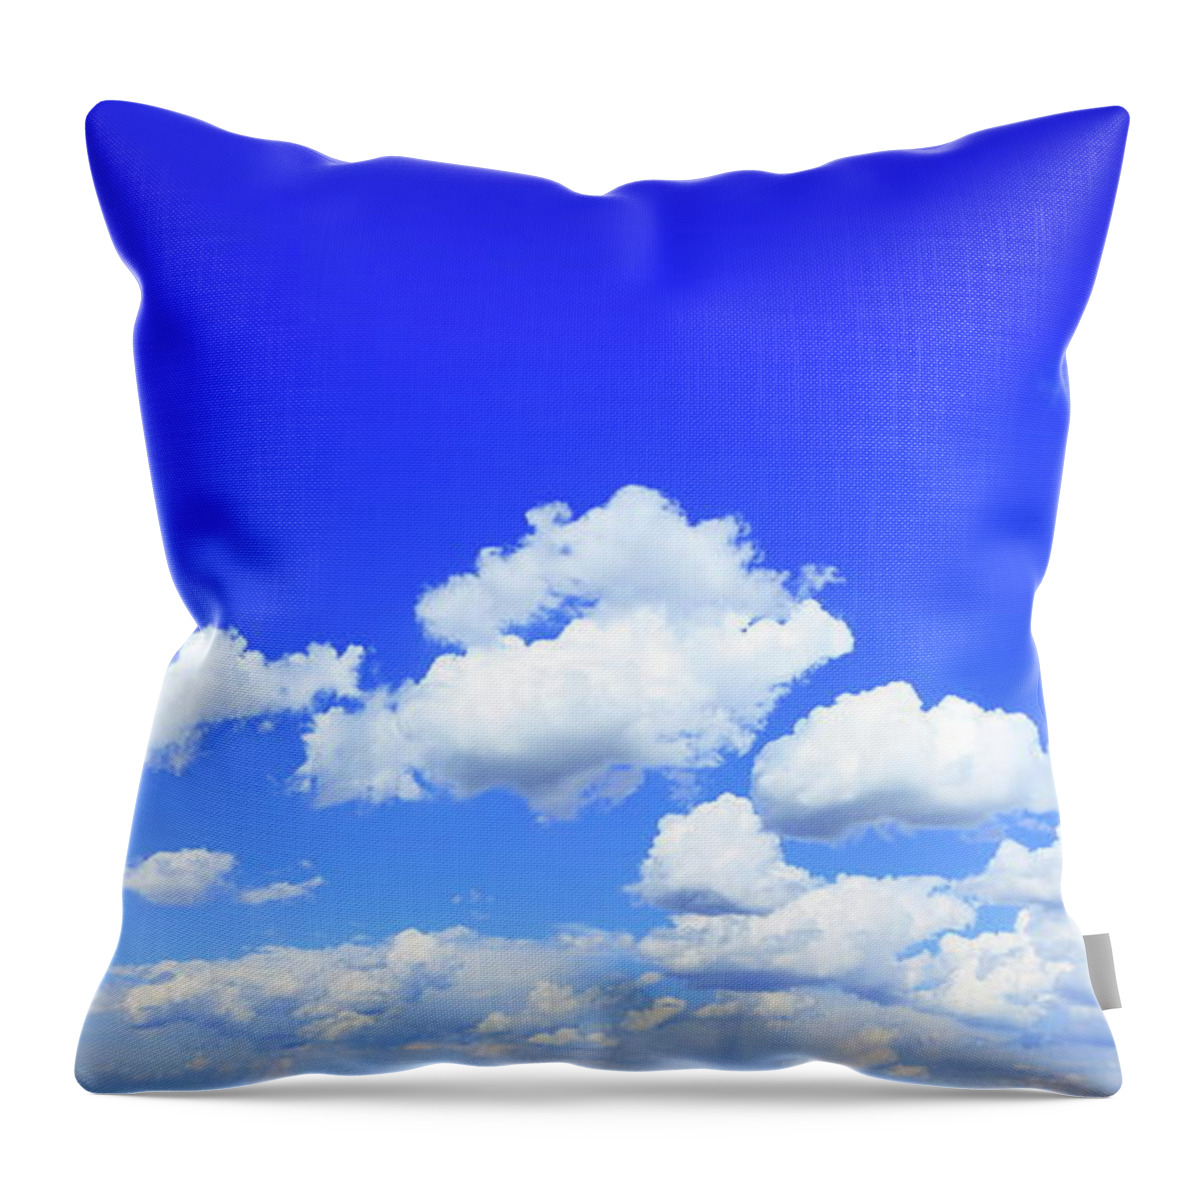 Scenics Throw Pillow featuring the photograph Blue Sky - Xxxl Cloudscape Panorama by Bgfoto